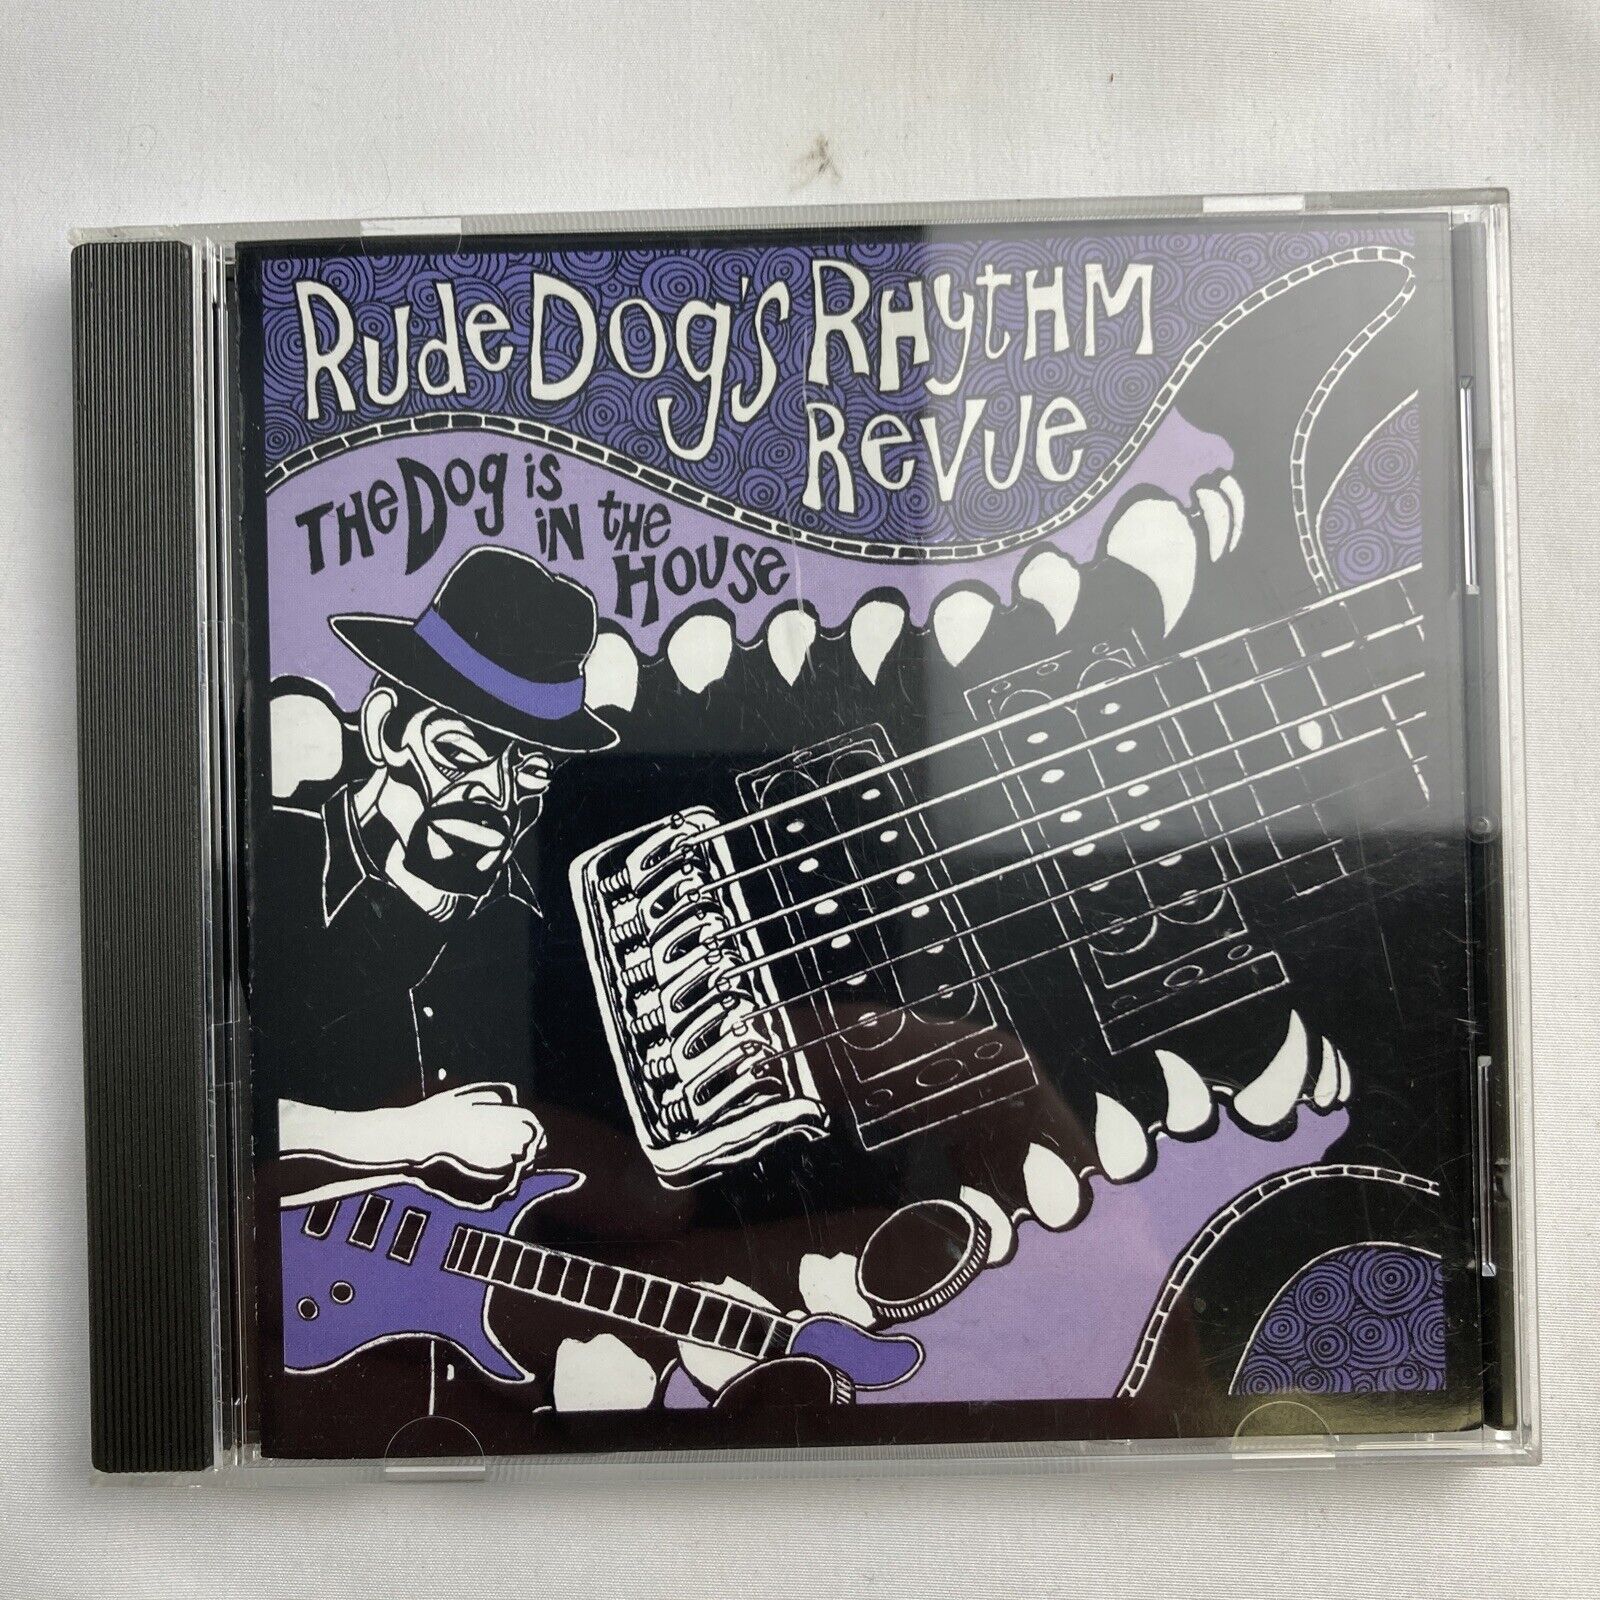 Rude Dog's Rhythm Revue - The Dog Is In The House (CD, 2008) Blues Jazz American